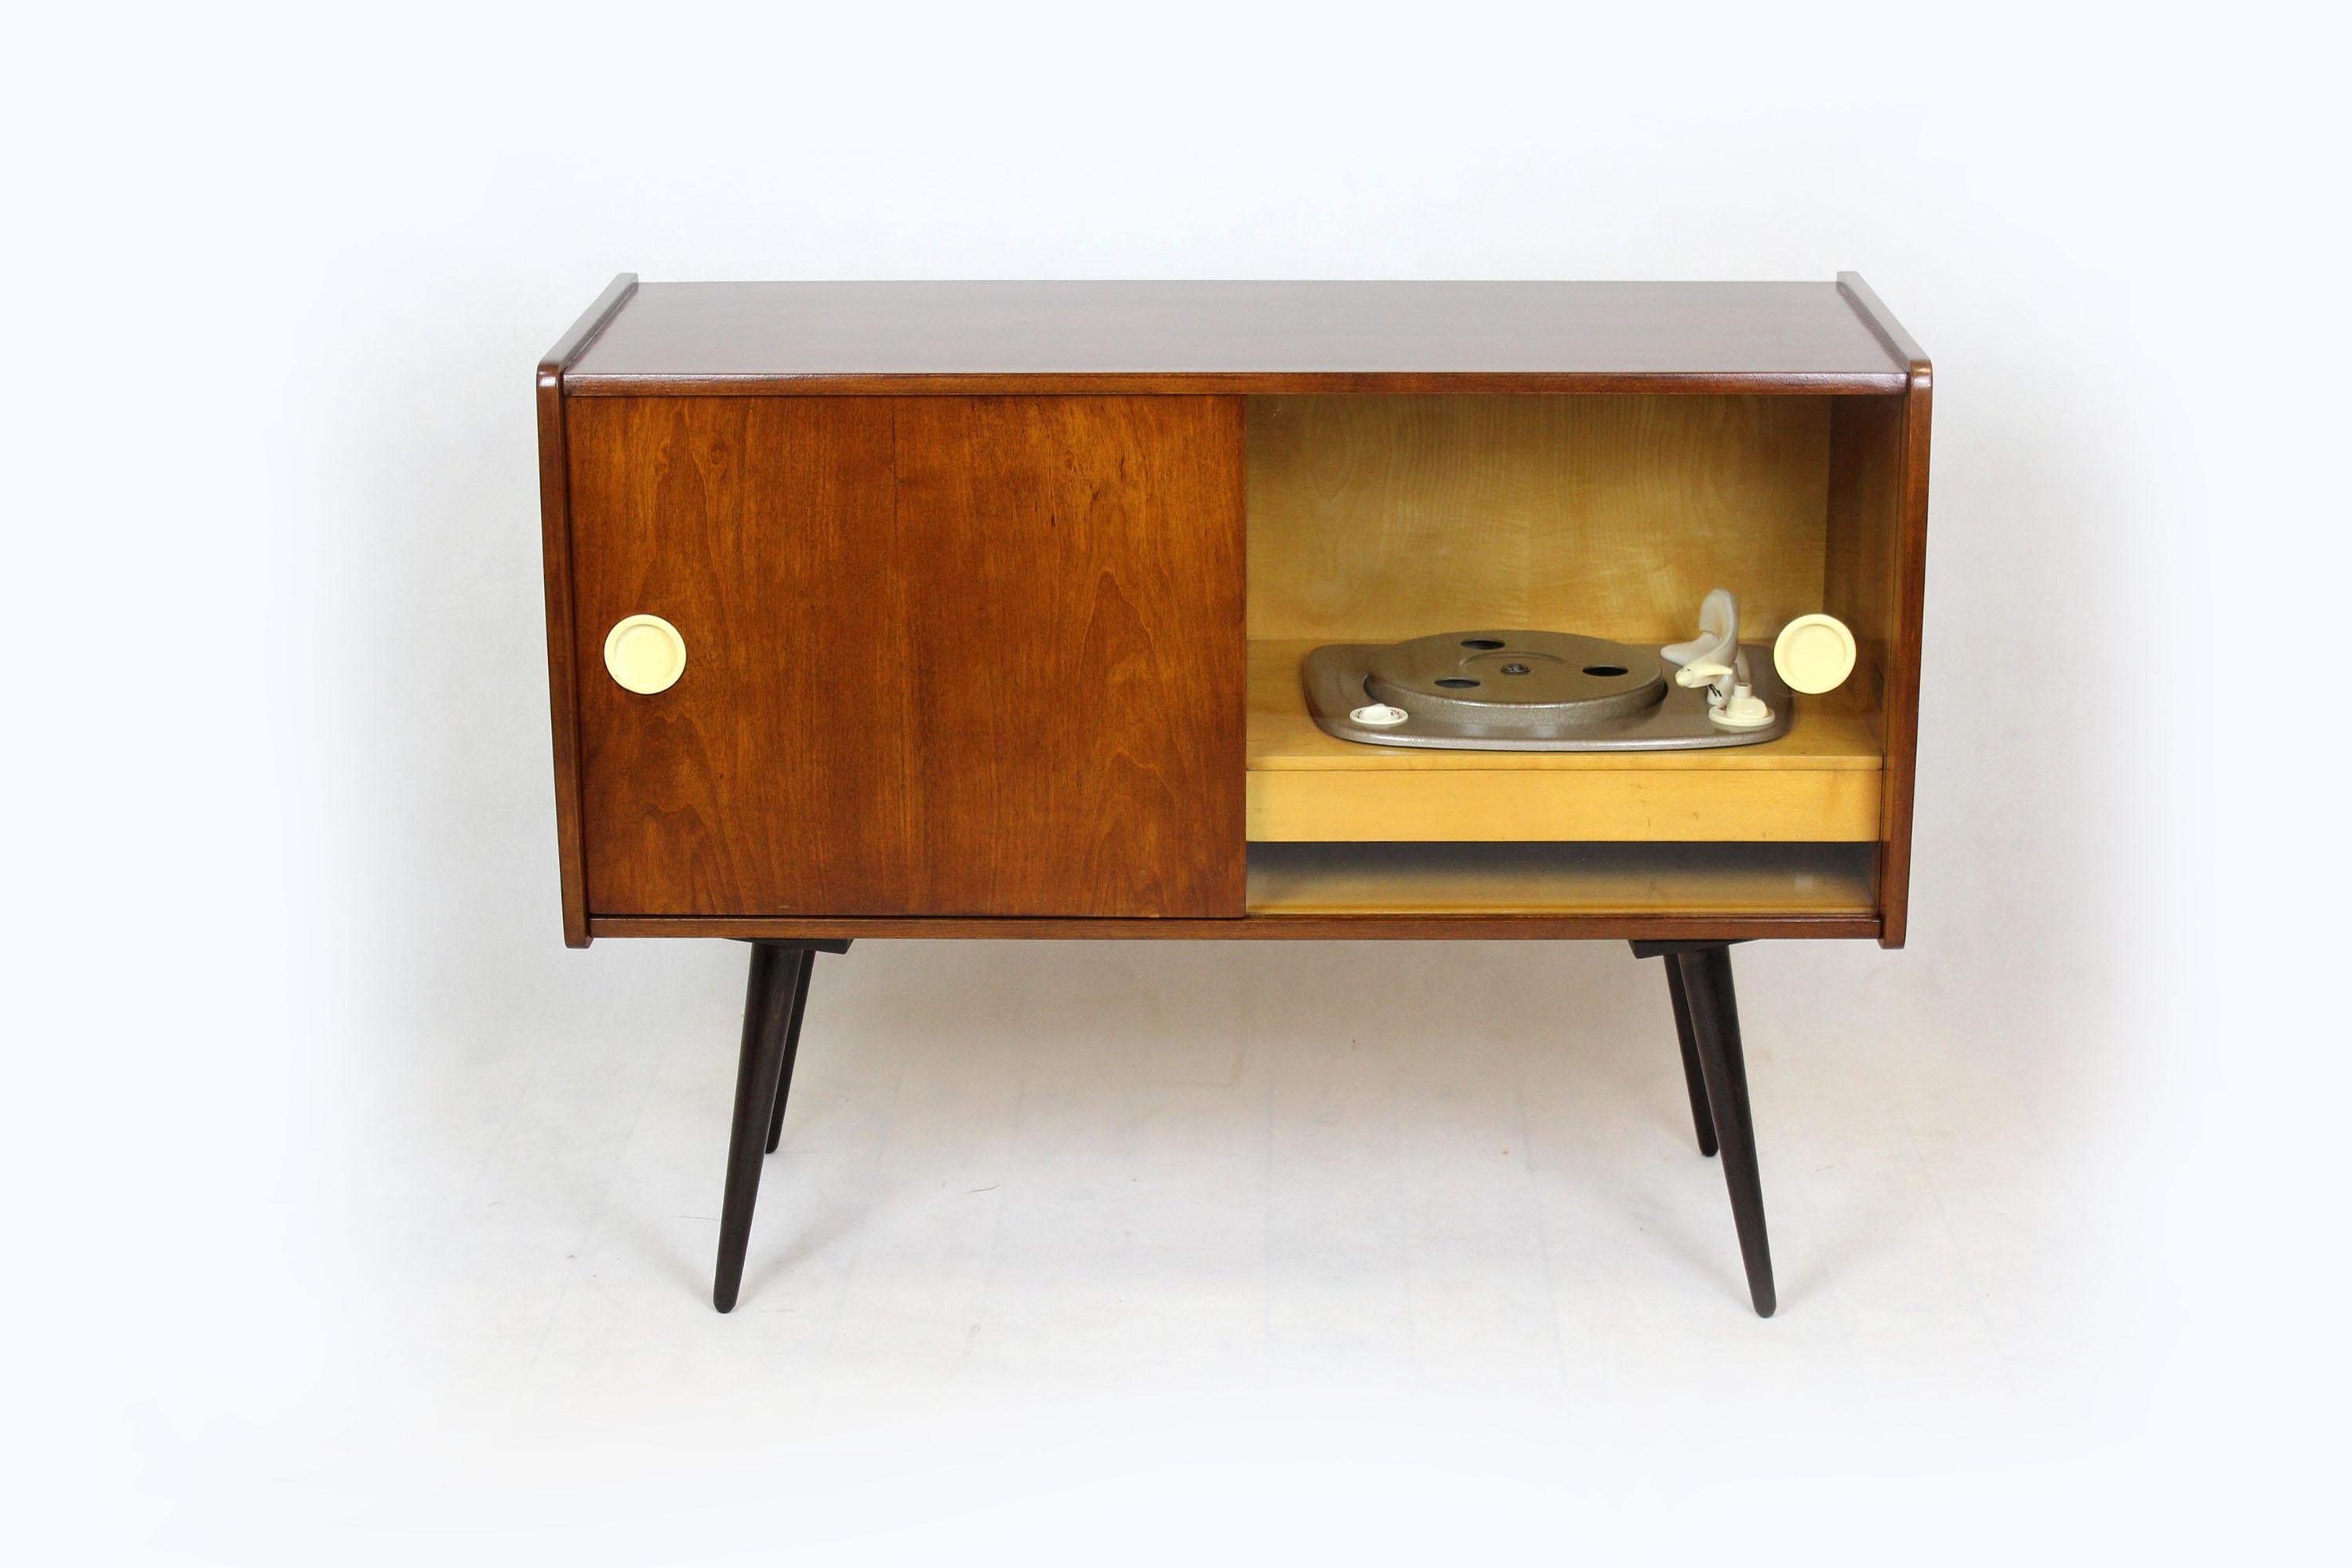 Record cabinet made by Supraphon in 1959.The cabinet has been restored and is in very good condition. The turntable has not been checked, it is not known if it works.